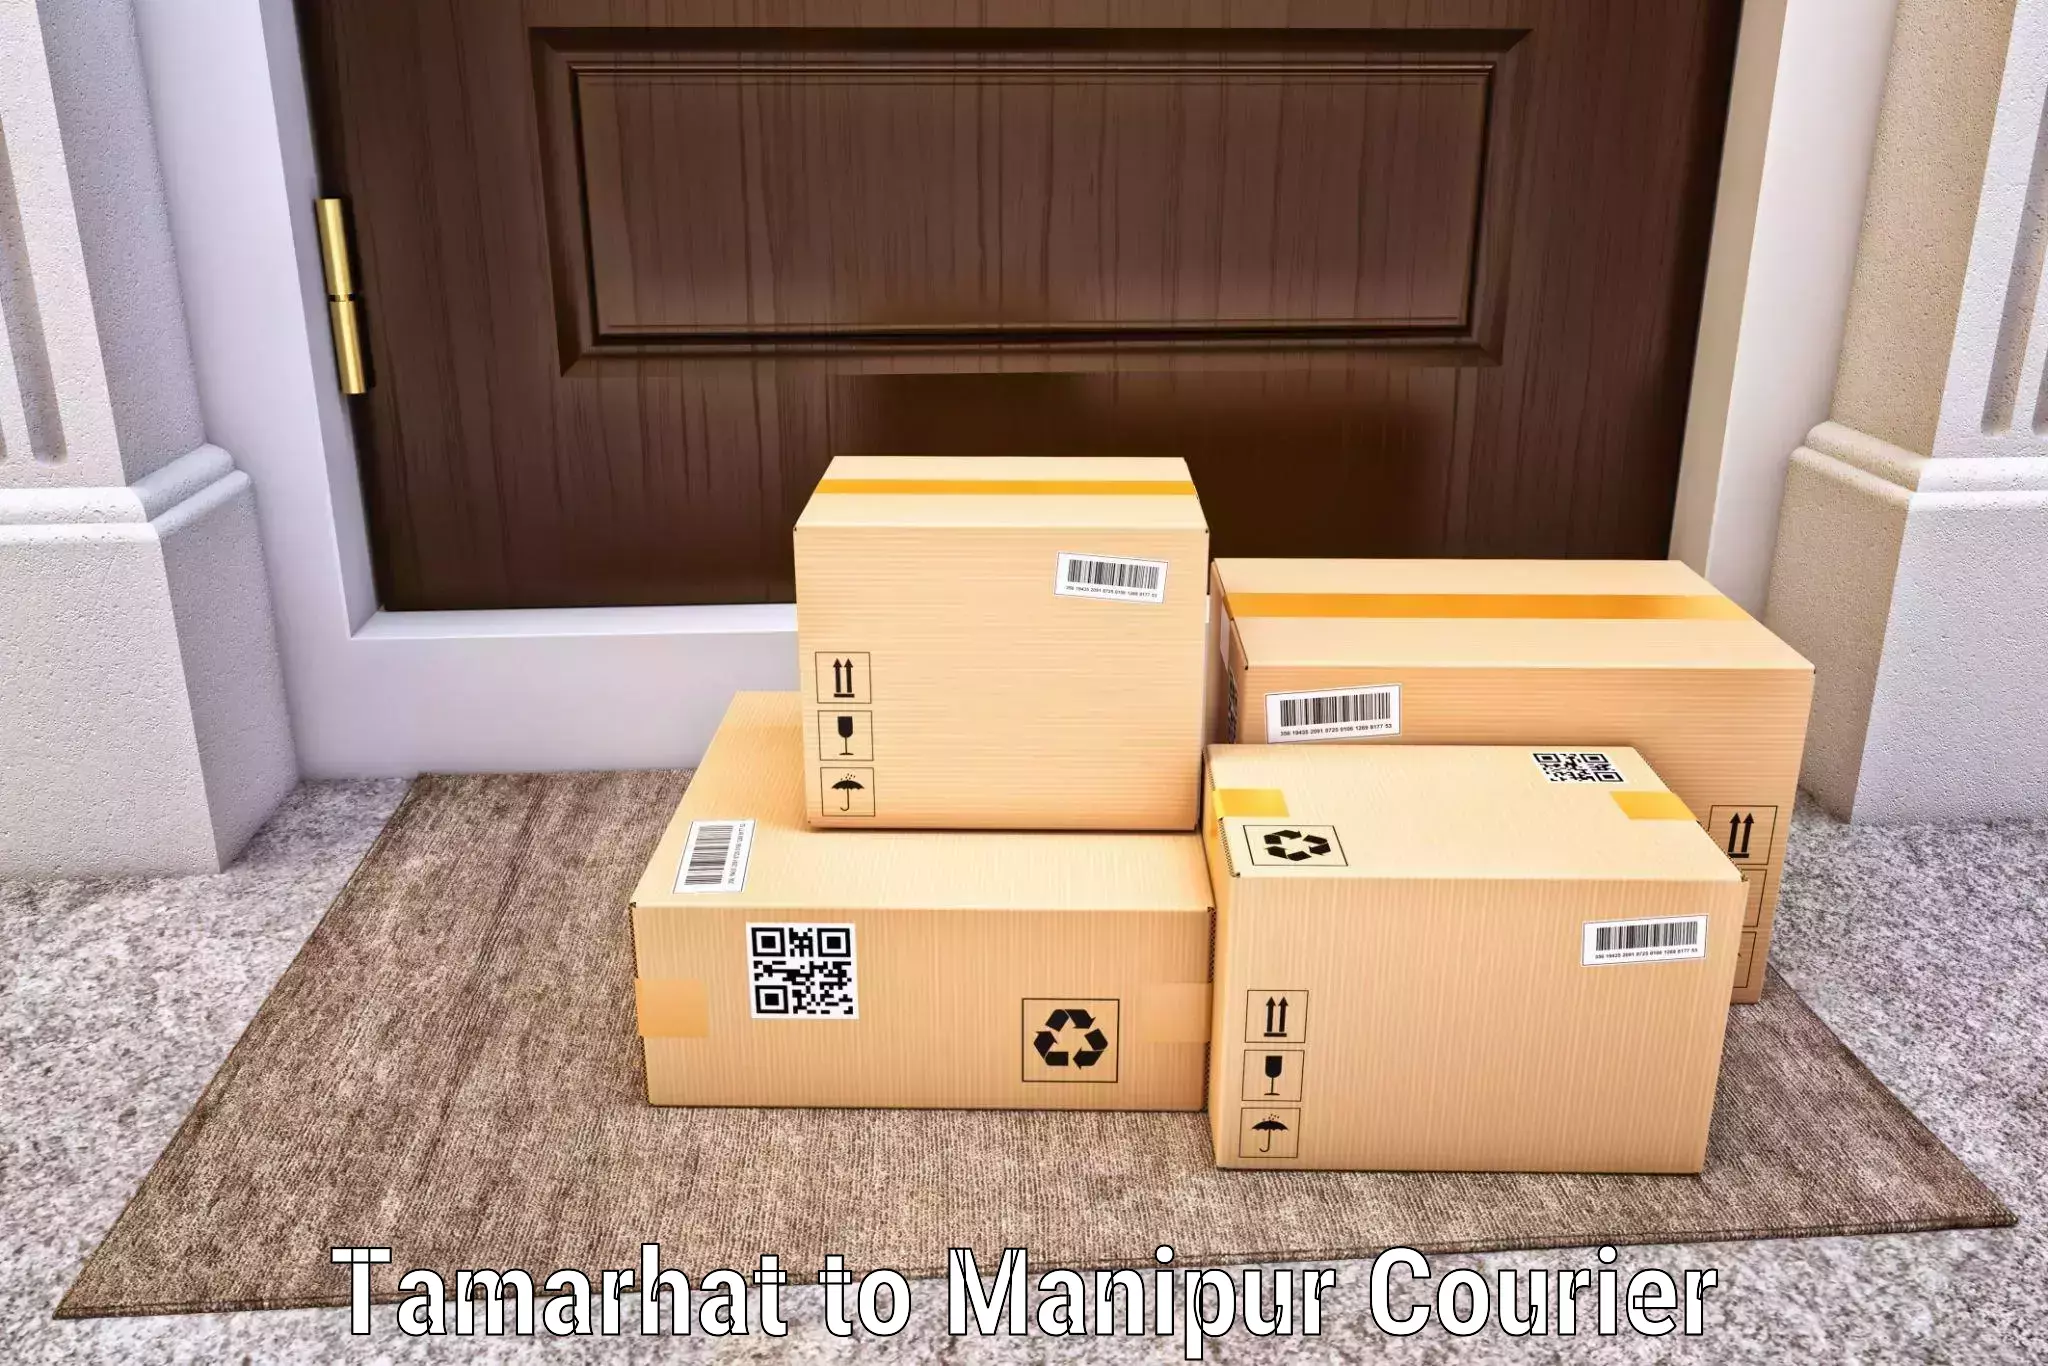 On-call courier service Tamarhat to Manipur